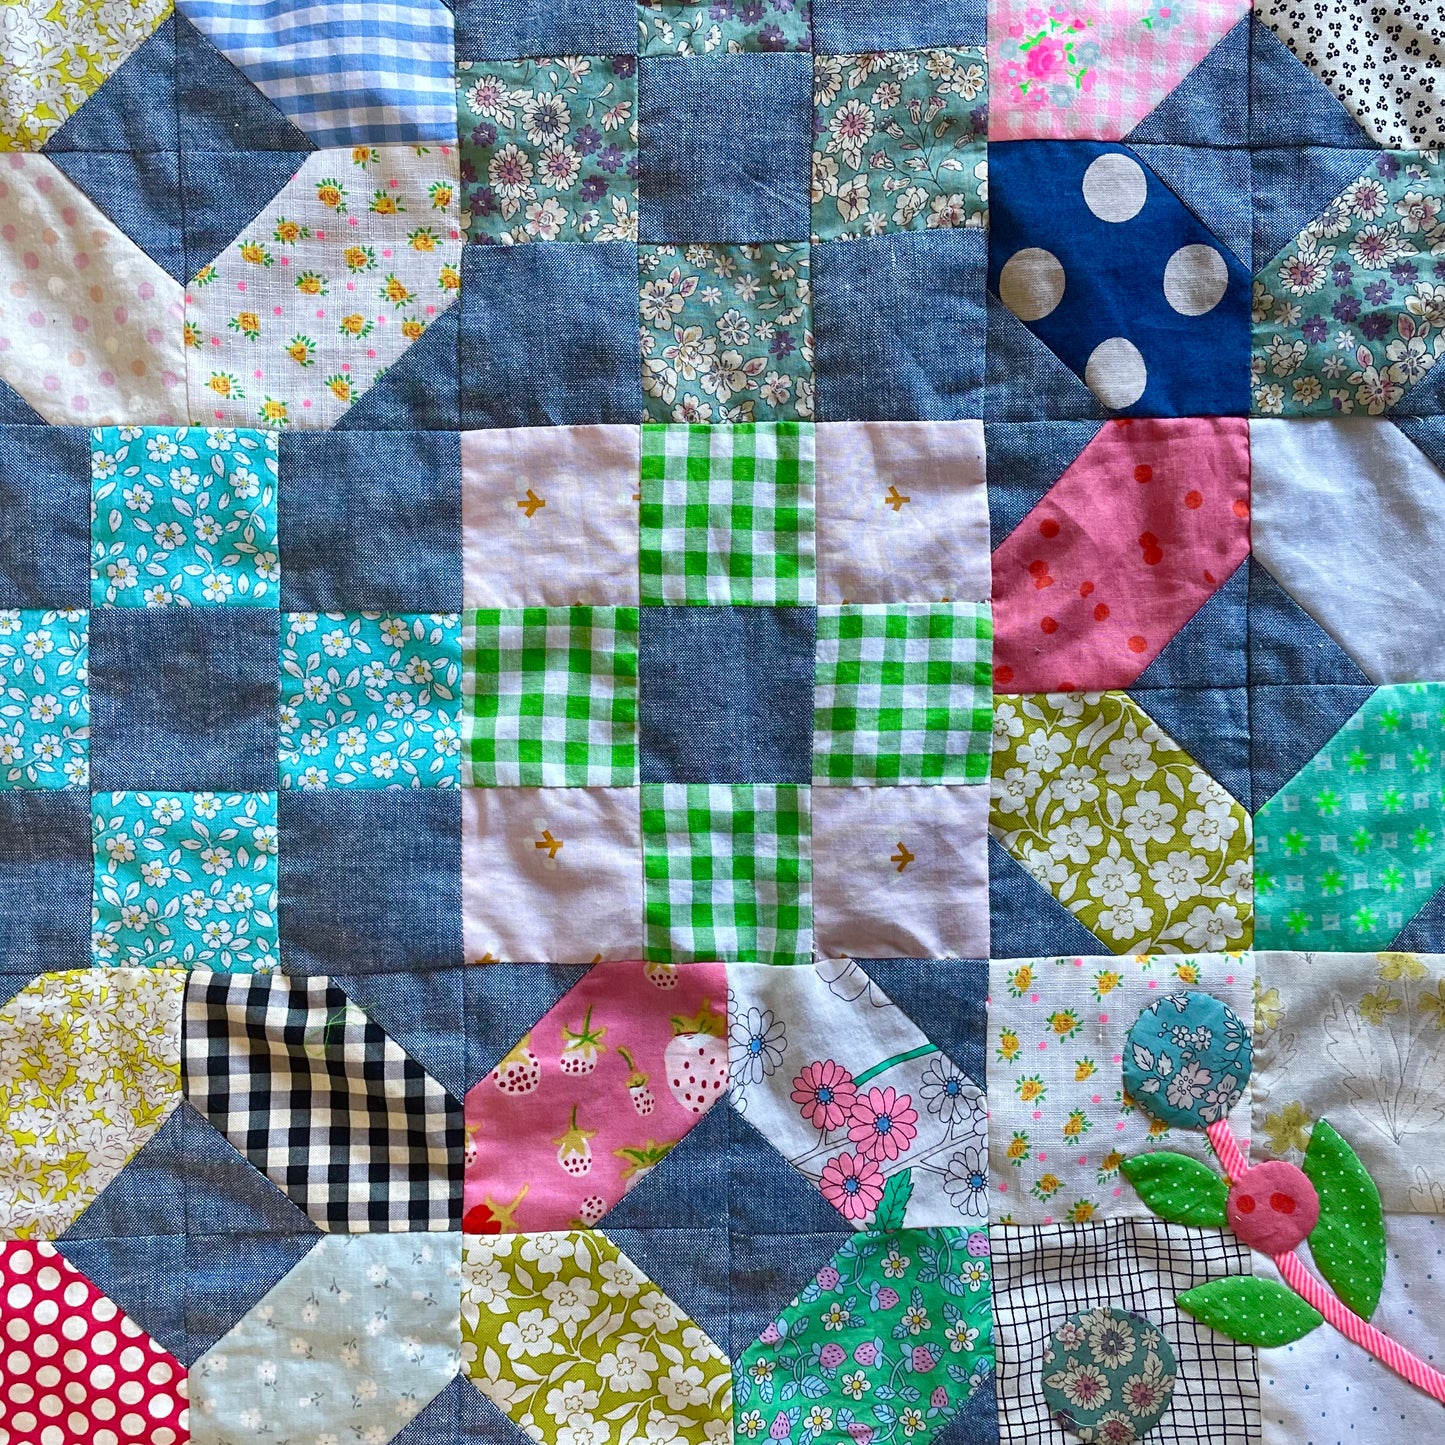 North Point Quilt (A5 Hard Copy Booklet)